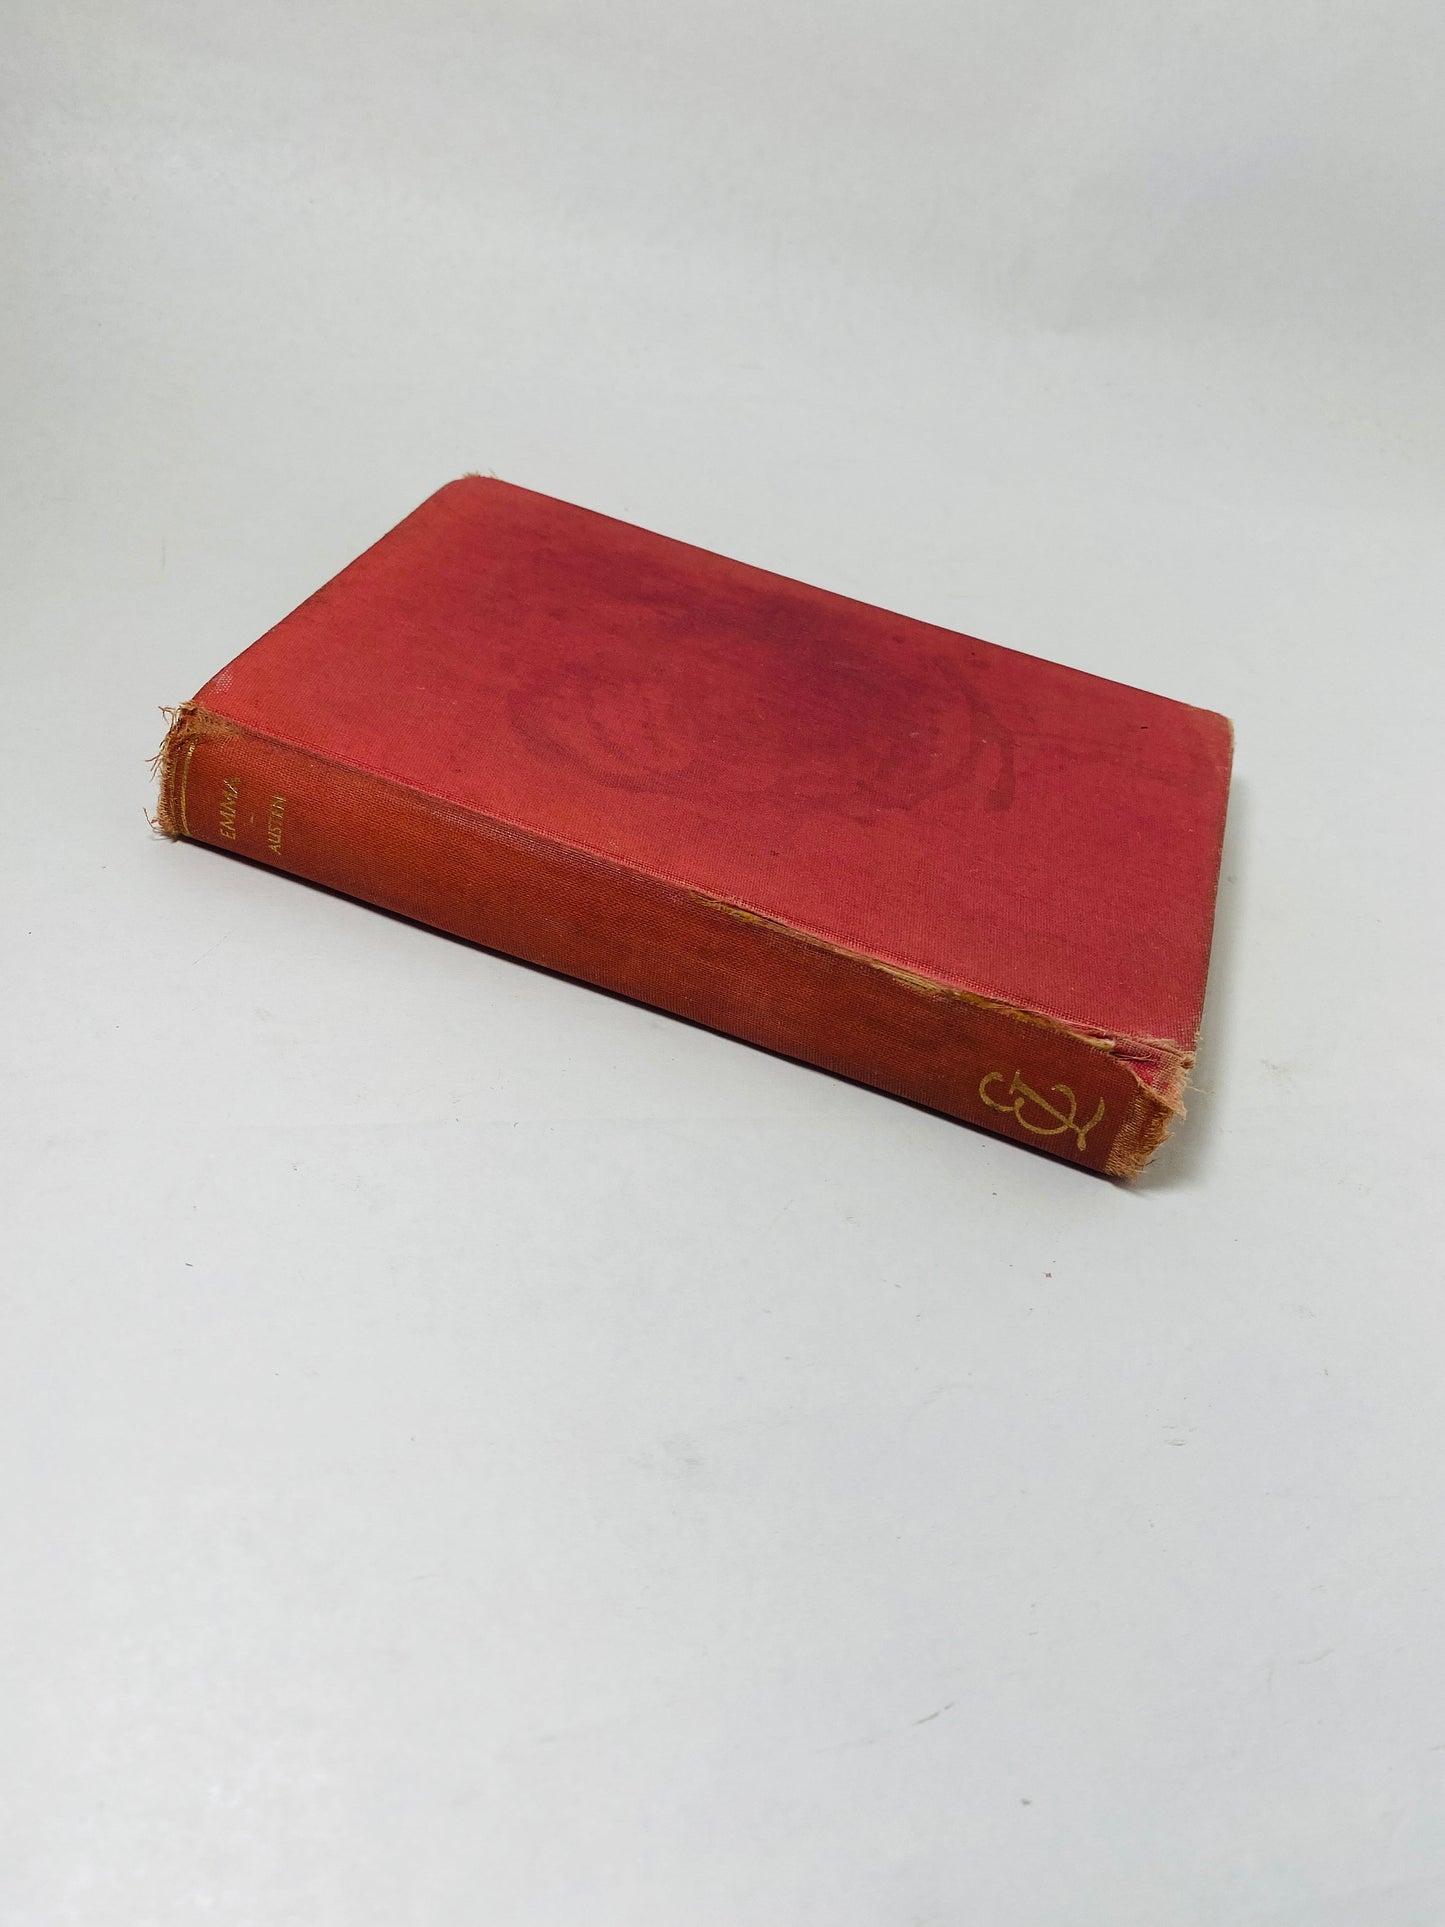 Emma by Jane Austen circa 1955 Vintage red cloth bound book detailing love, romance and broken engagements. Beautiful book lover gift